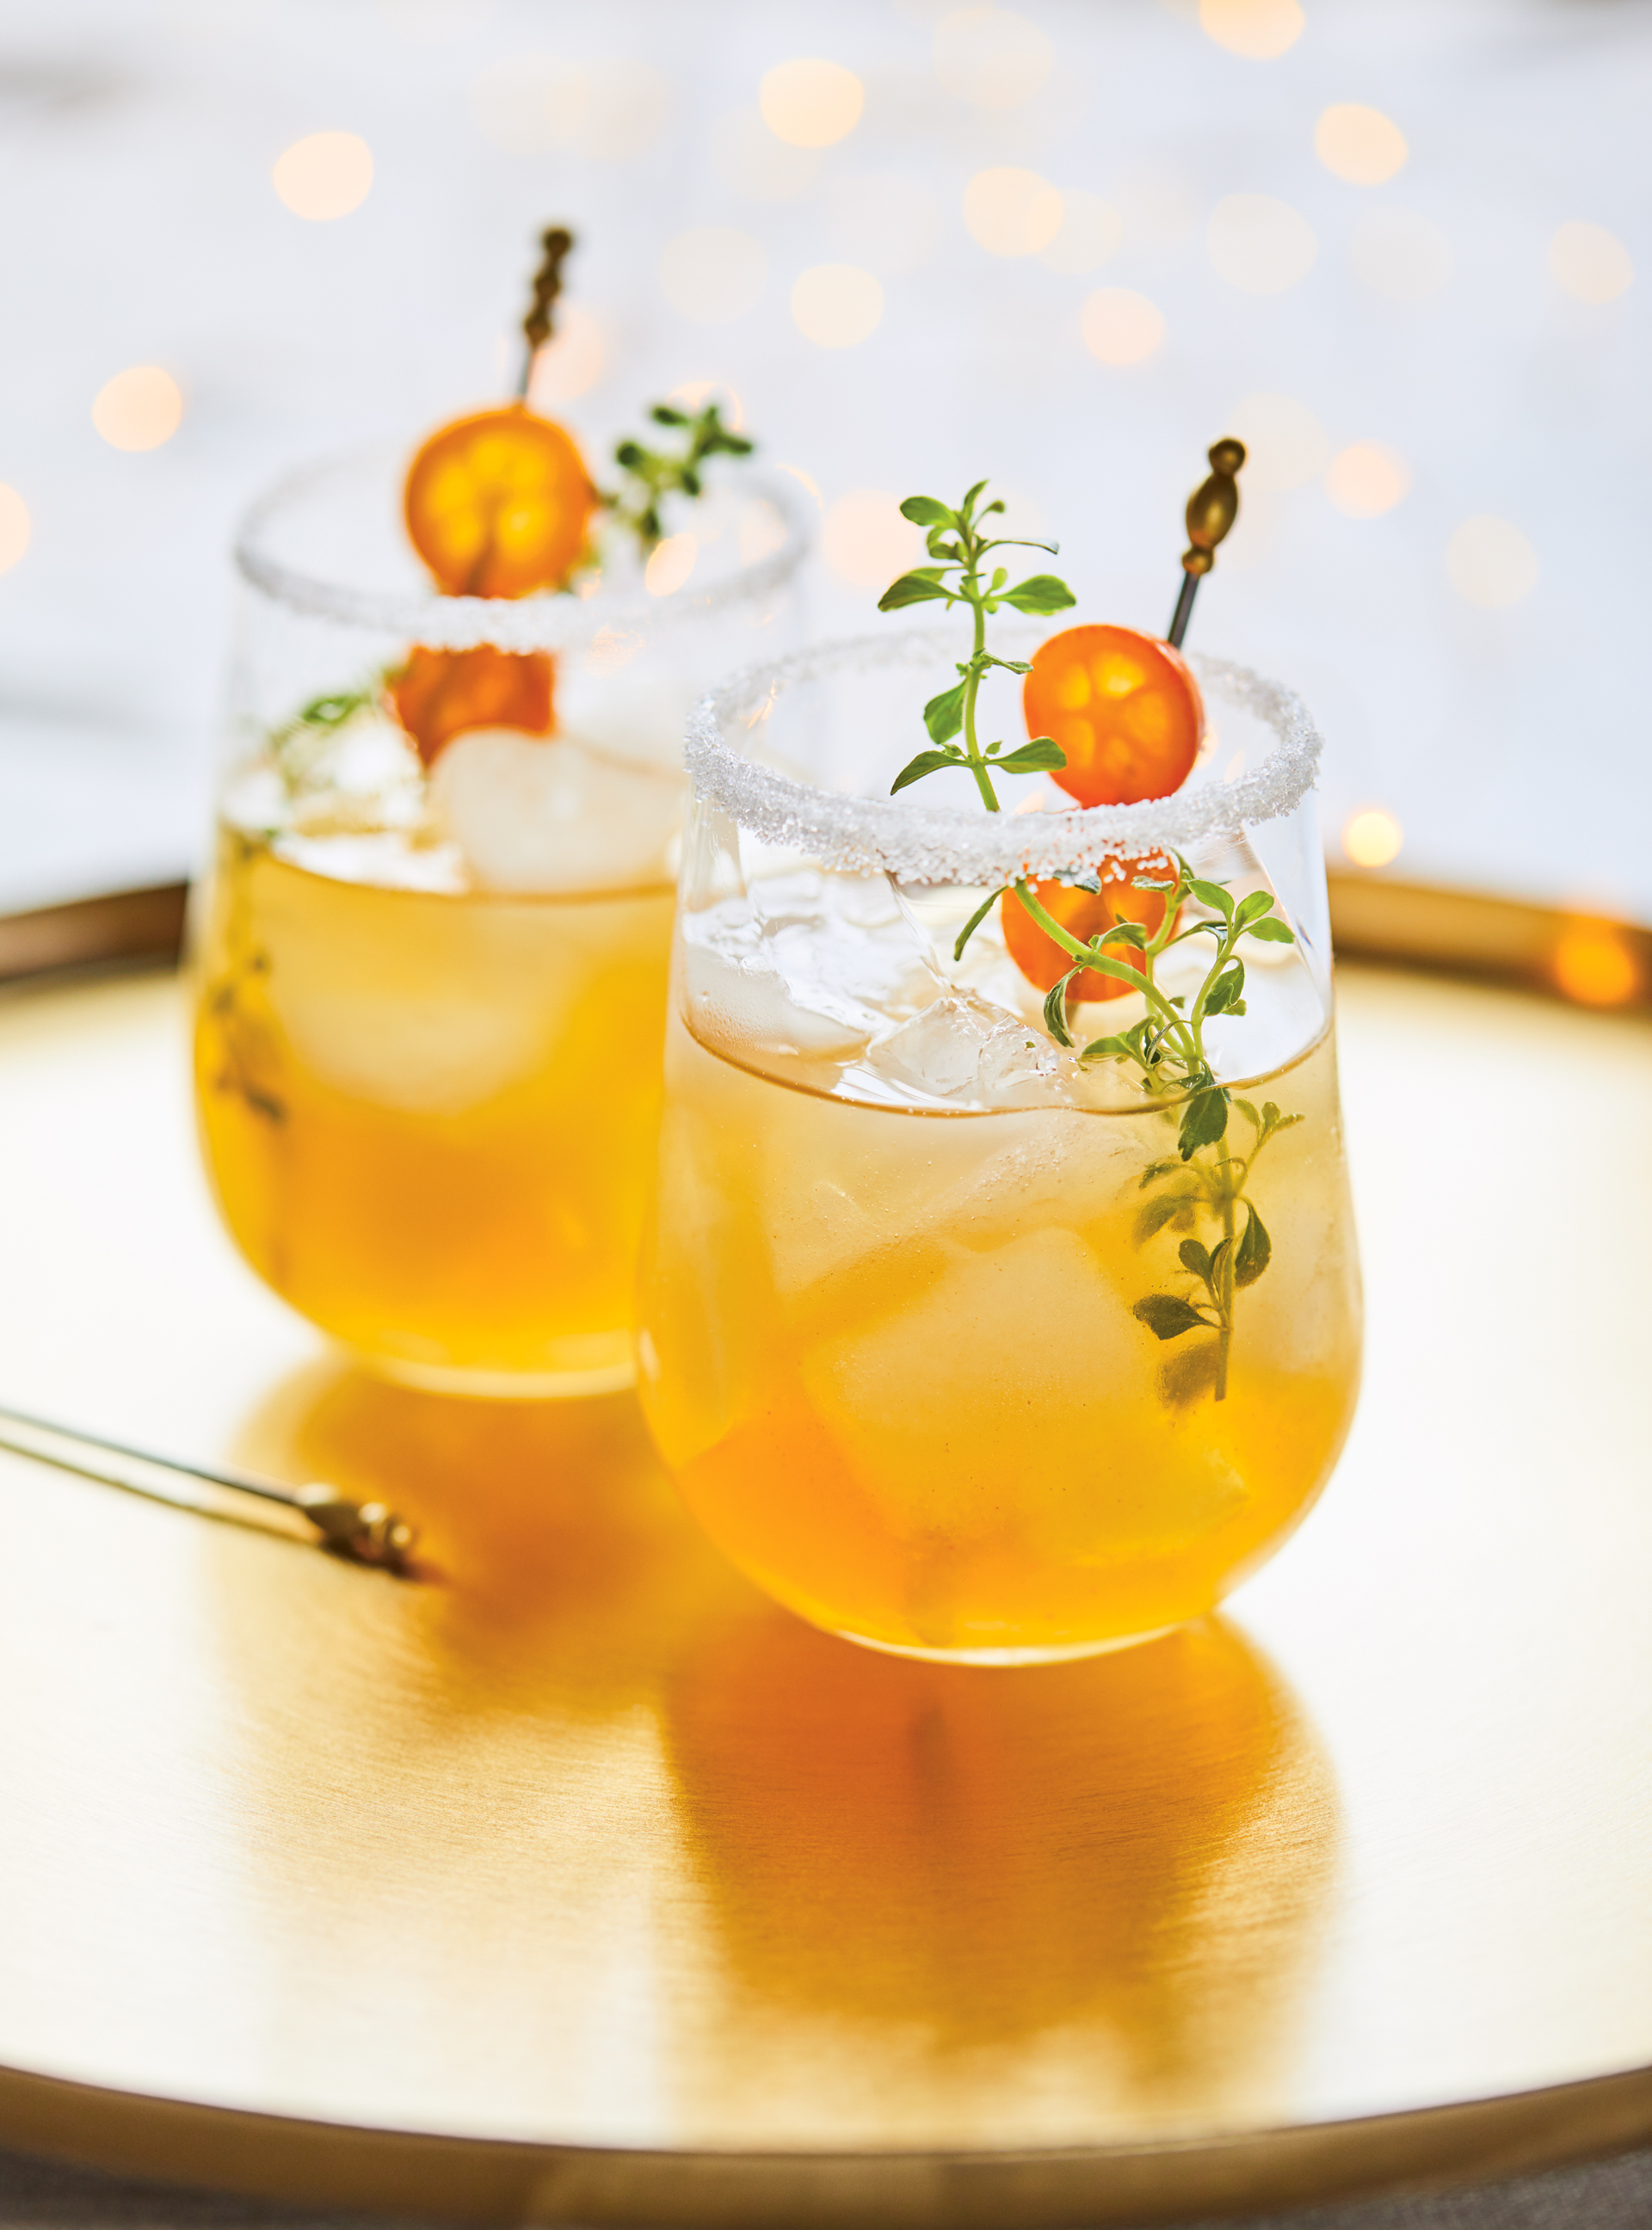 Spiced Rum with Marmalade